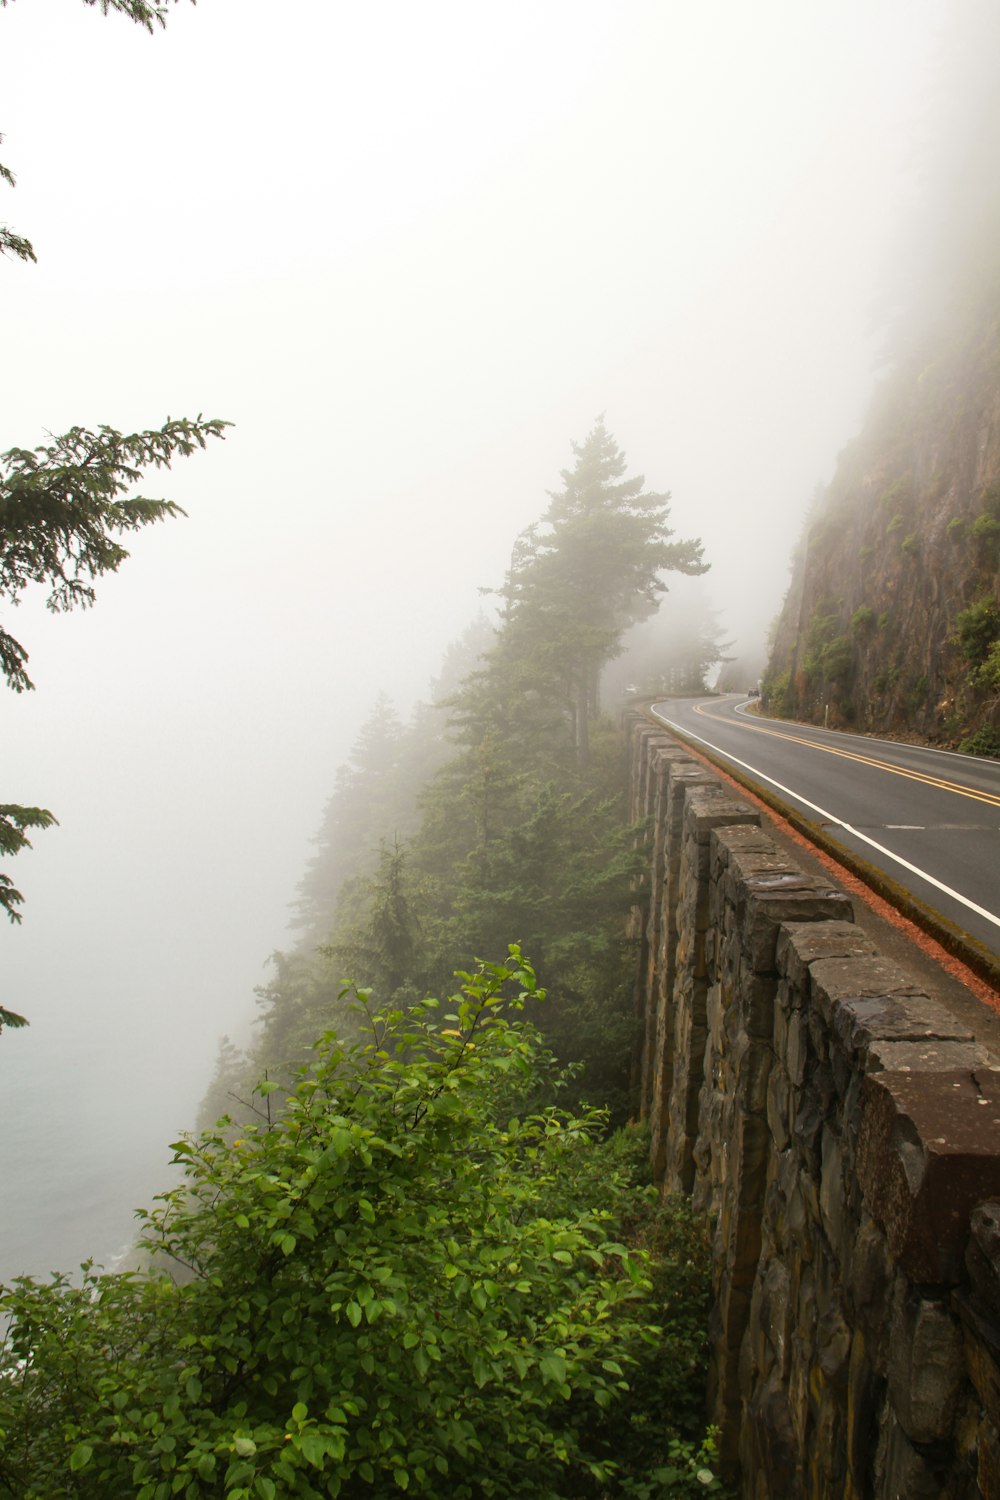 a foggy day on a road near a body of water